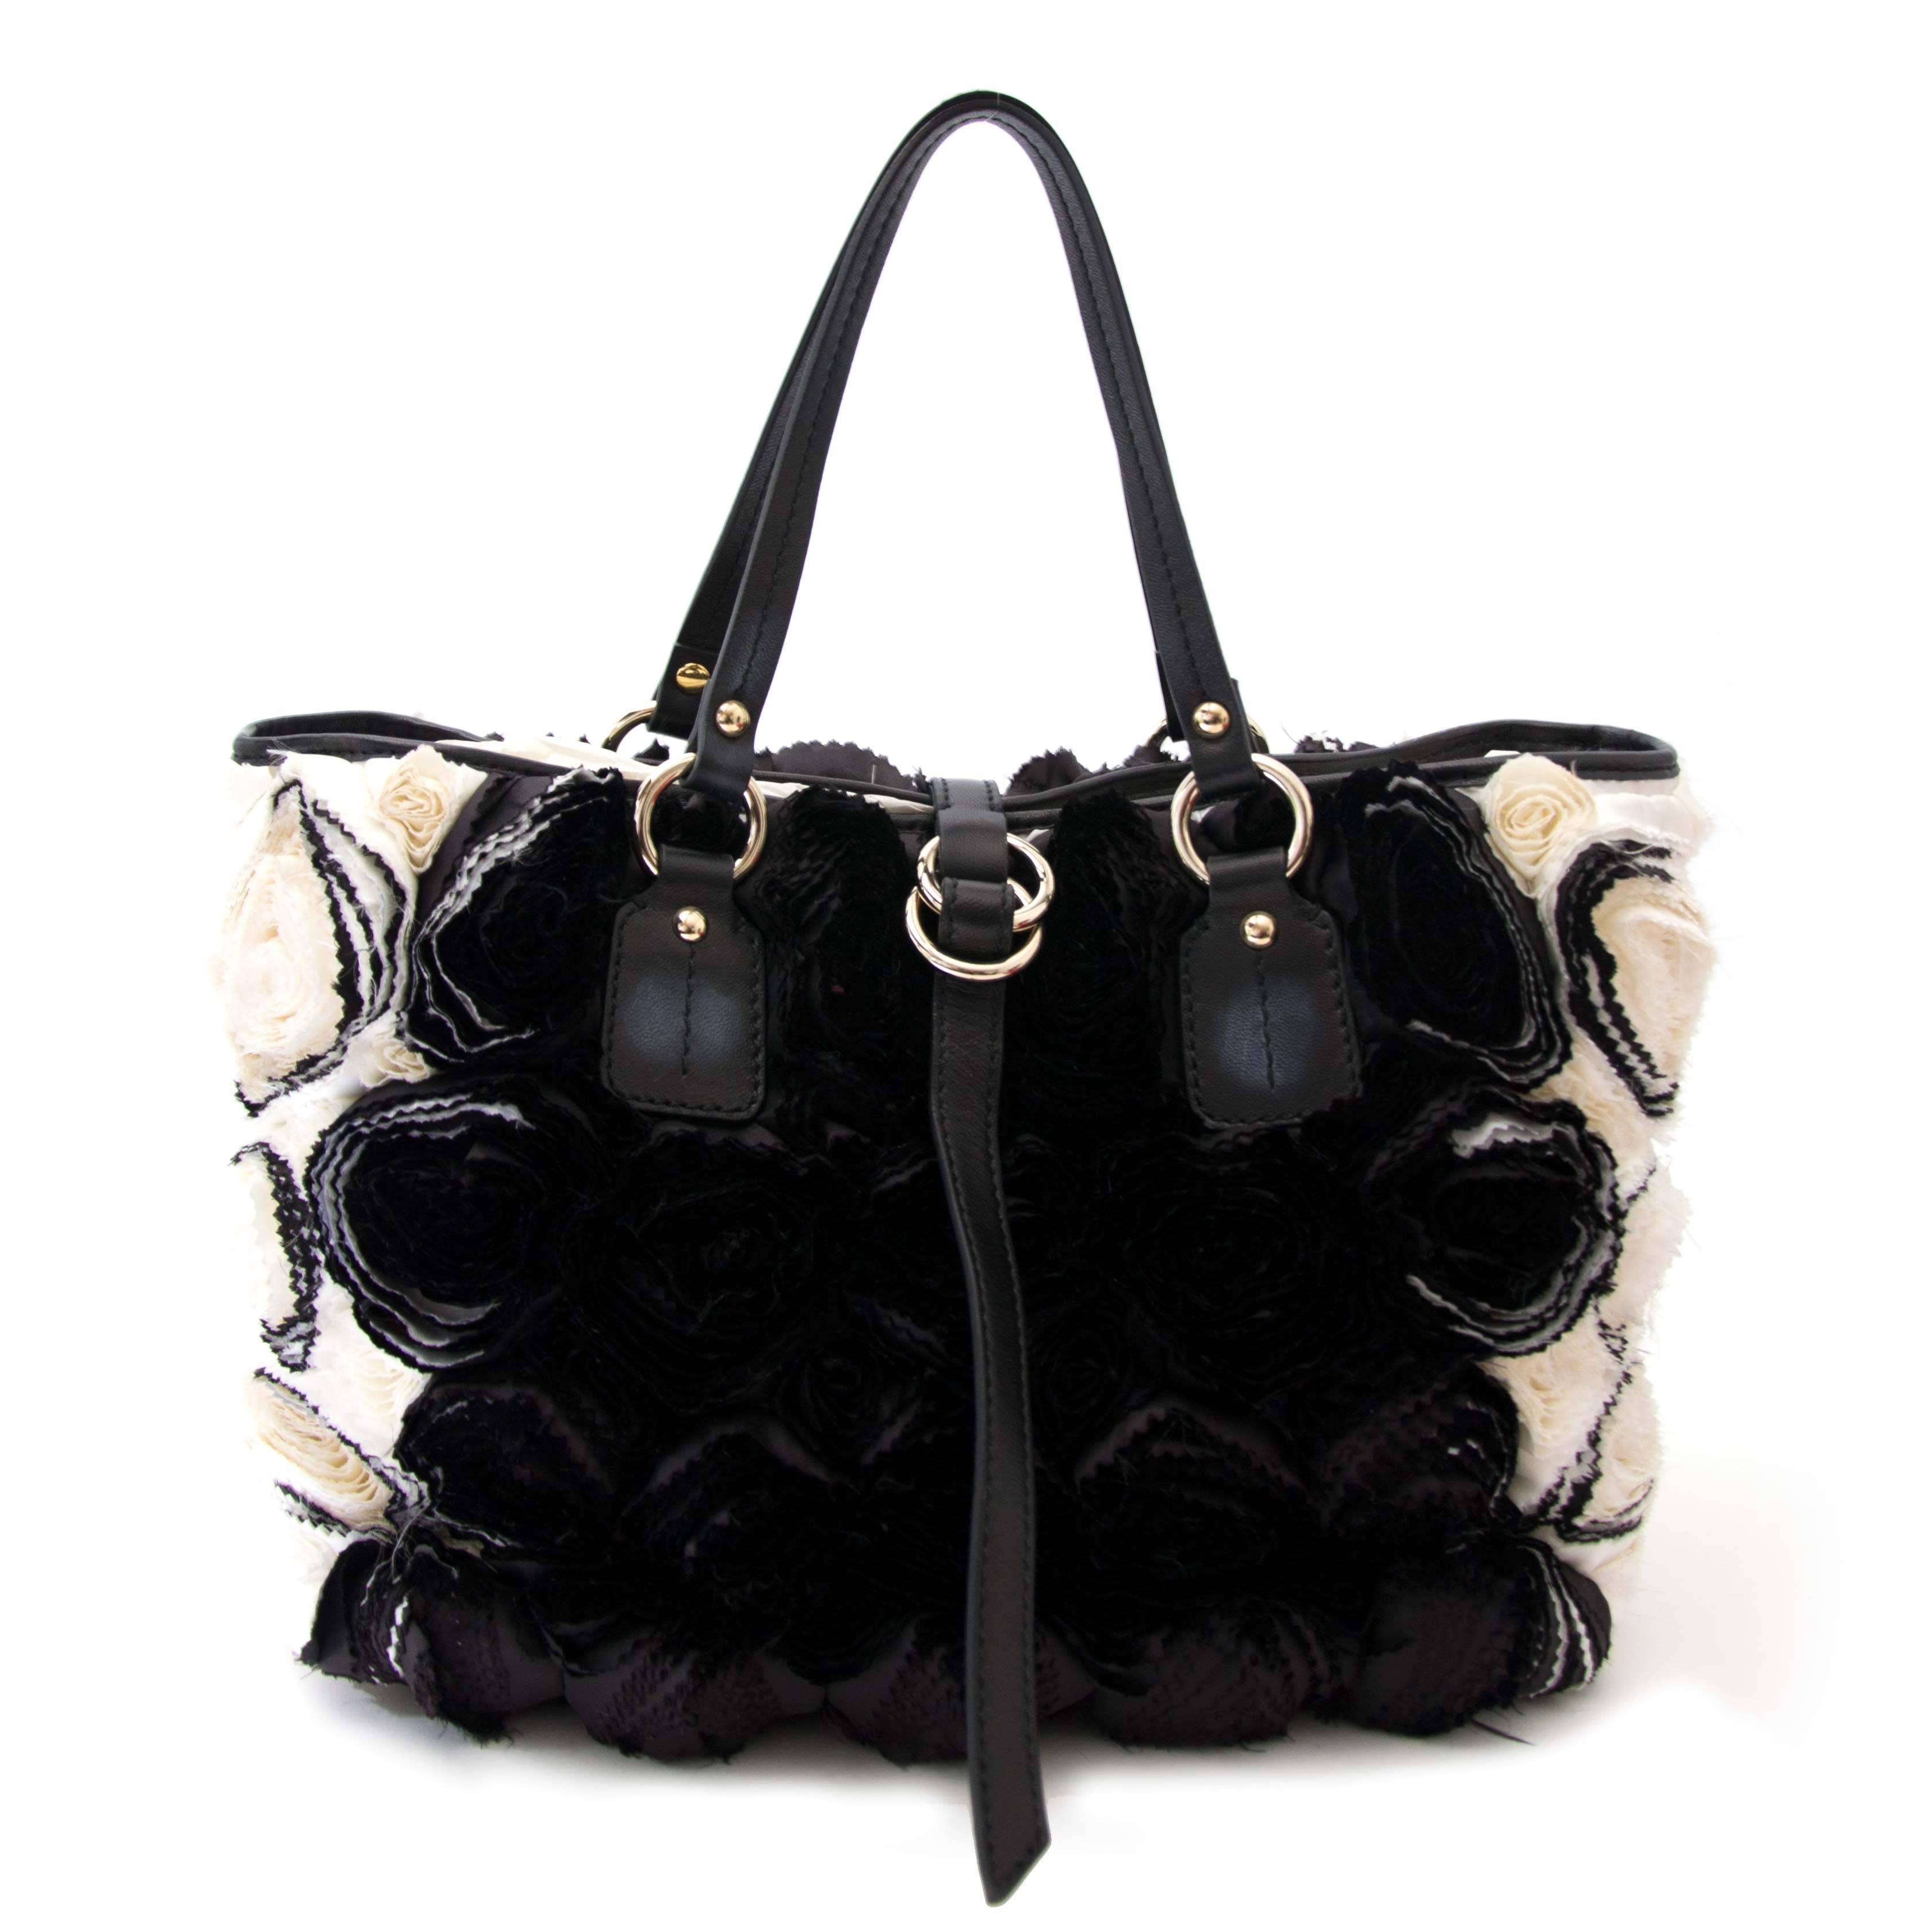 Excellent condition

Valentino Rosette Black and White Shoulder Bag

Turn heads with this distinctive shoulder bag by Valentino. The satin Rosette embellishments make this a one-of-a-kind item. 

Leather shoulder straps, silver toned hardware, gold